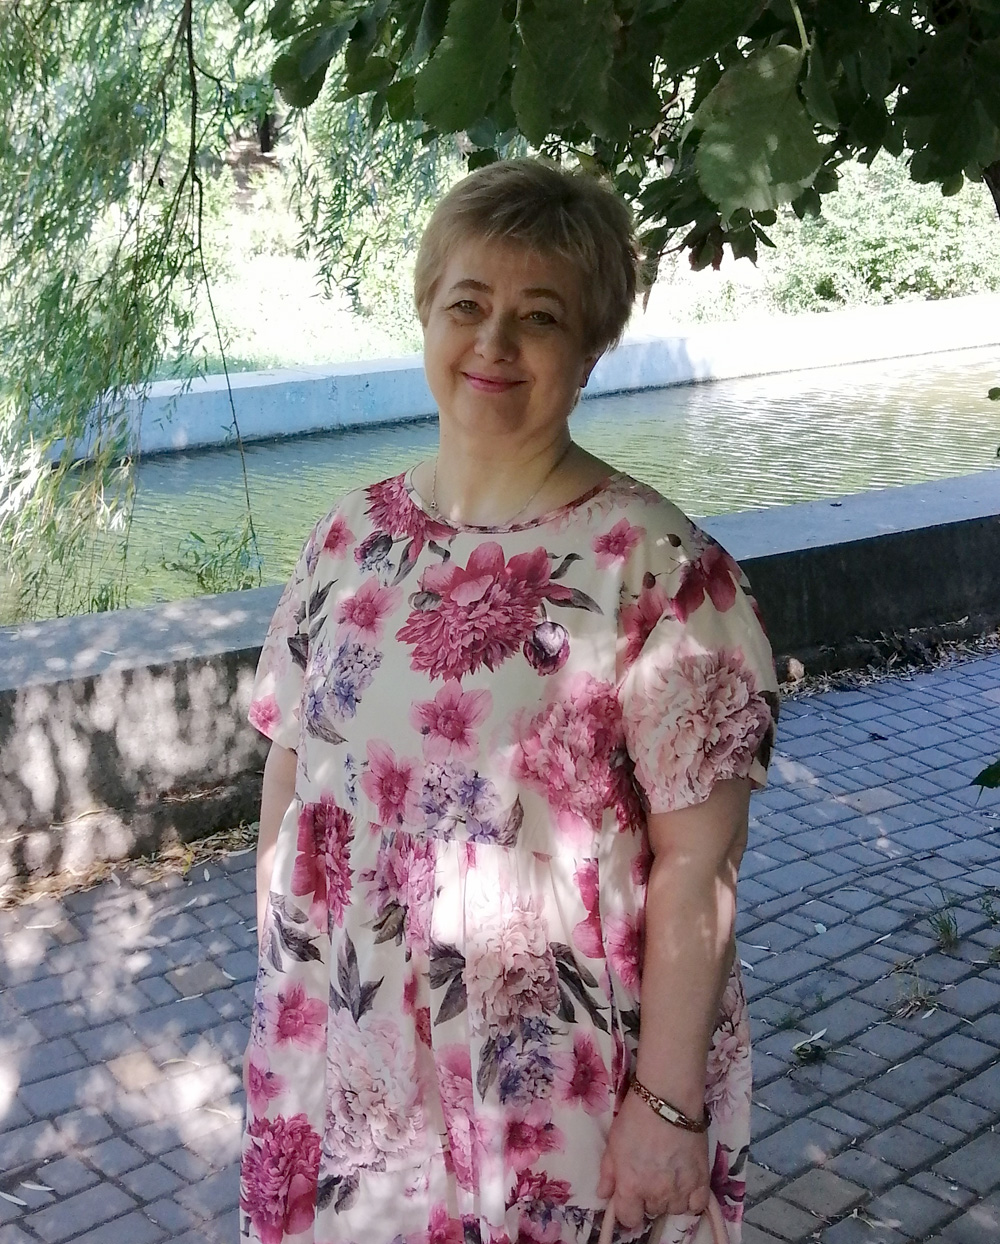 Kolomiichuk Tetiana Senior lecturer of the Department of Physiology, Human Health and Safety and Natural Science Education Odesa I. I. Mechnikov National University